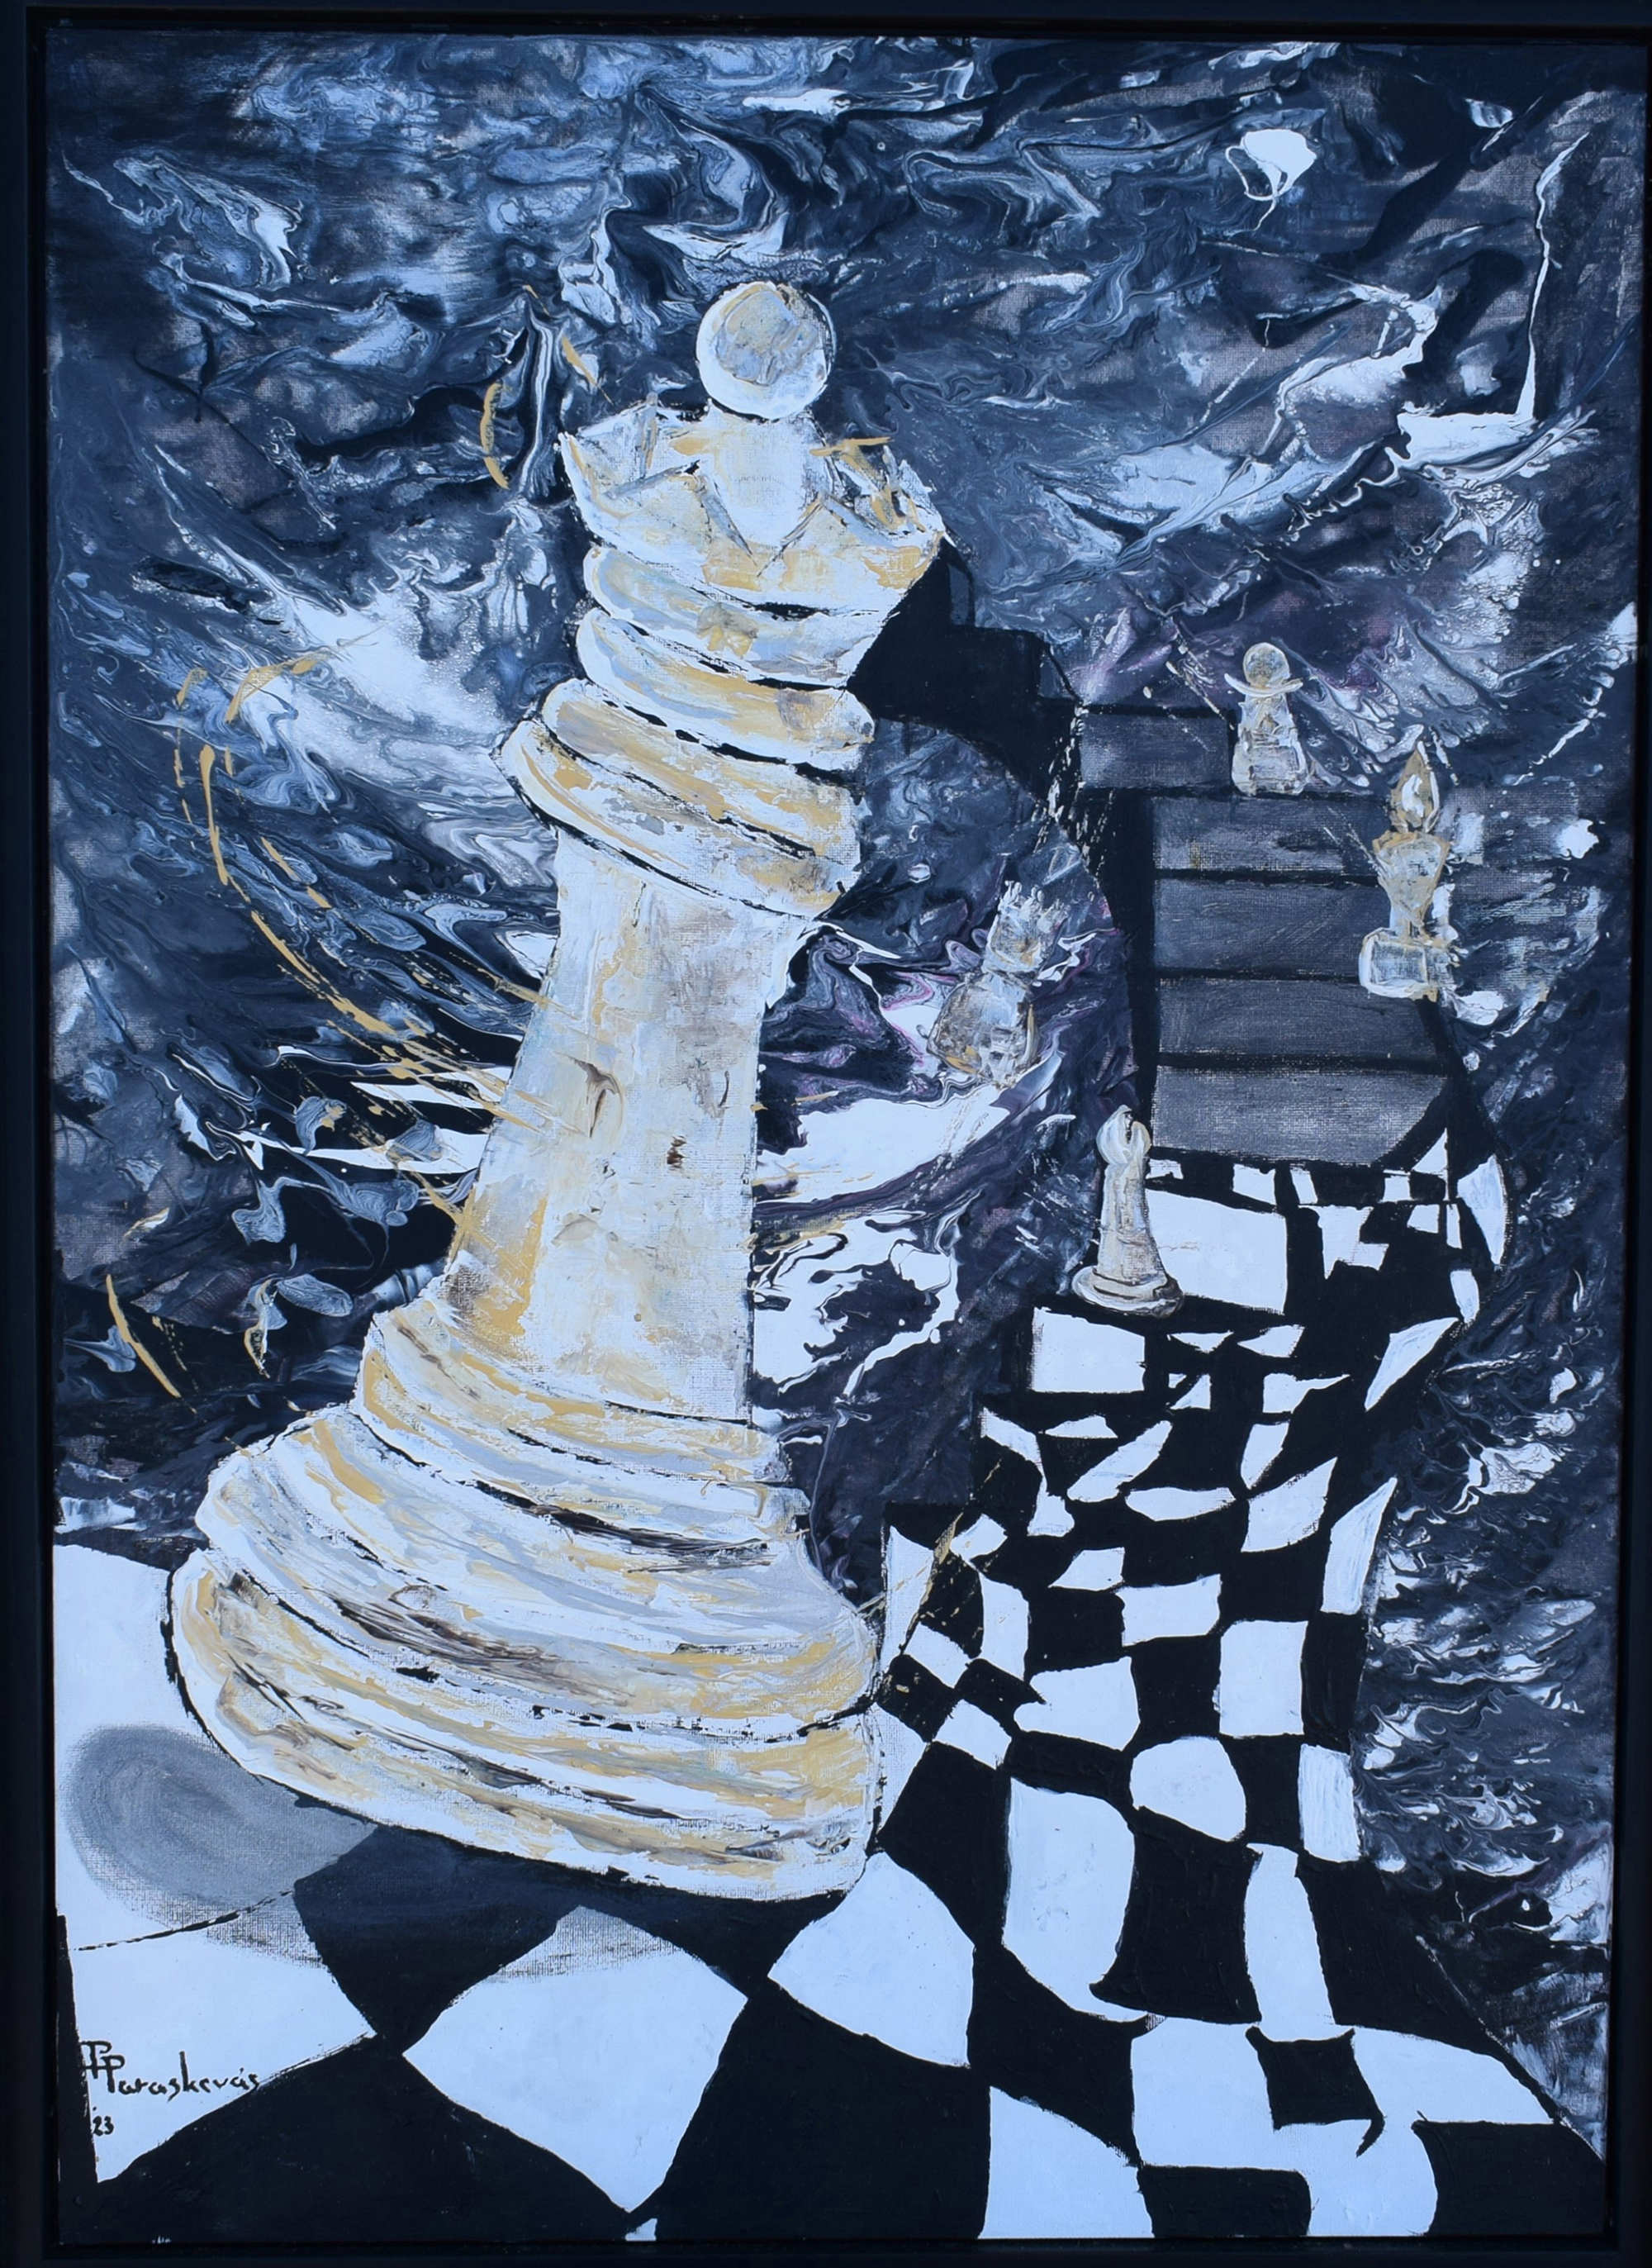 #PP.02 Title: "Chess route"